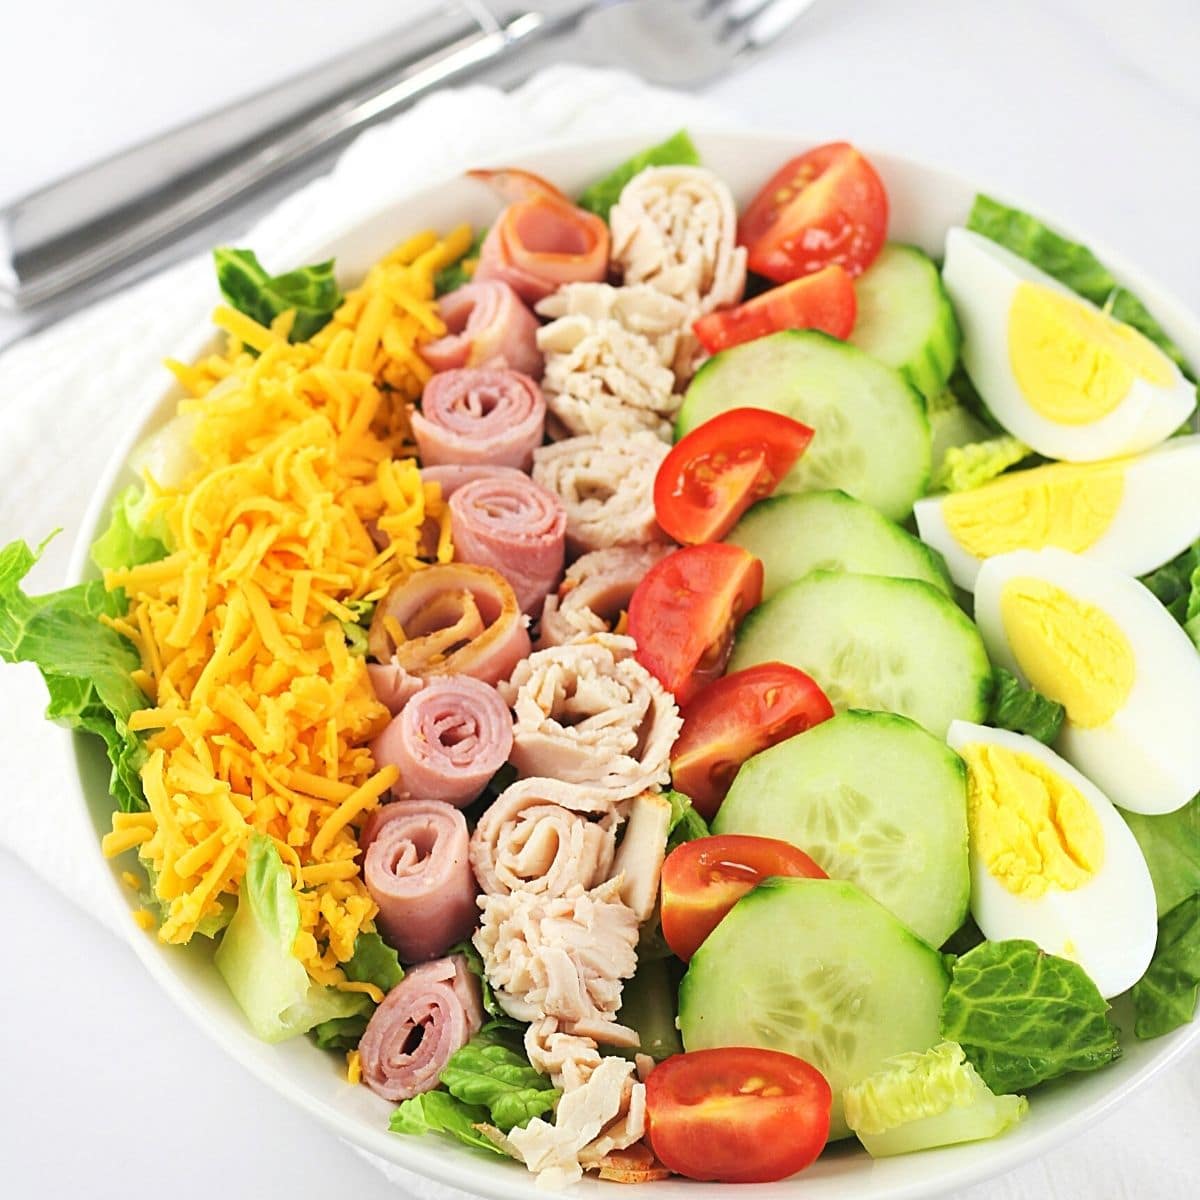 19 Chef Salad Nutrition Facts - Facts.net